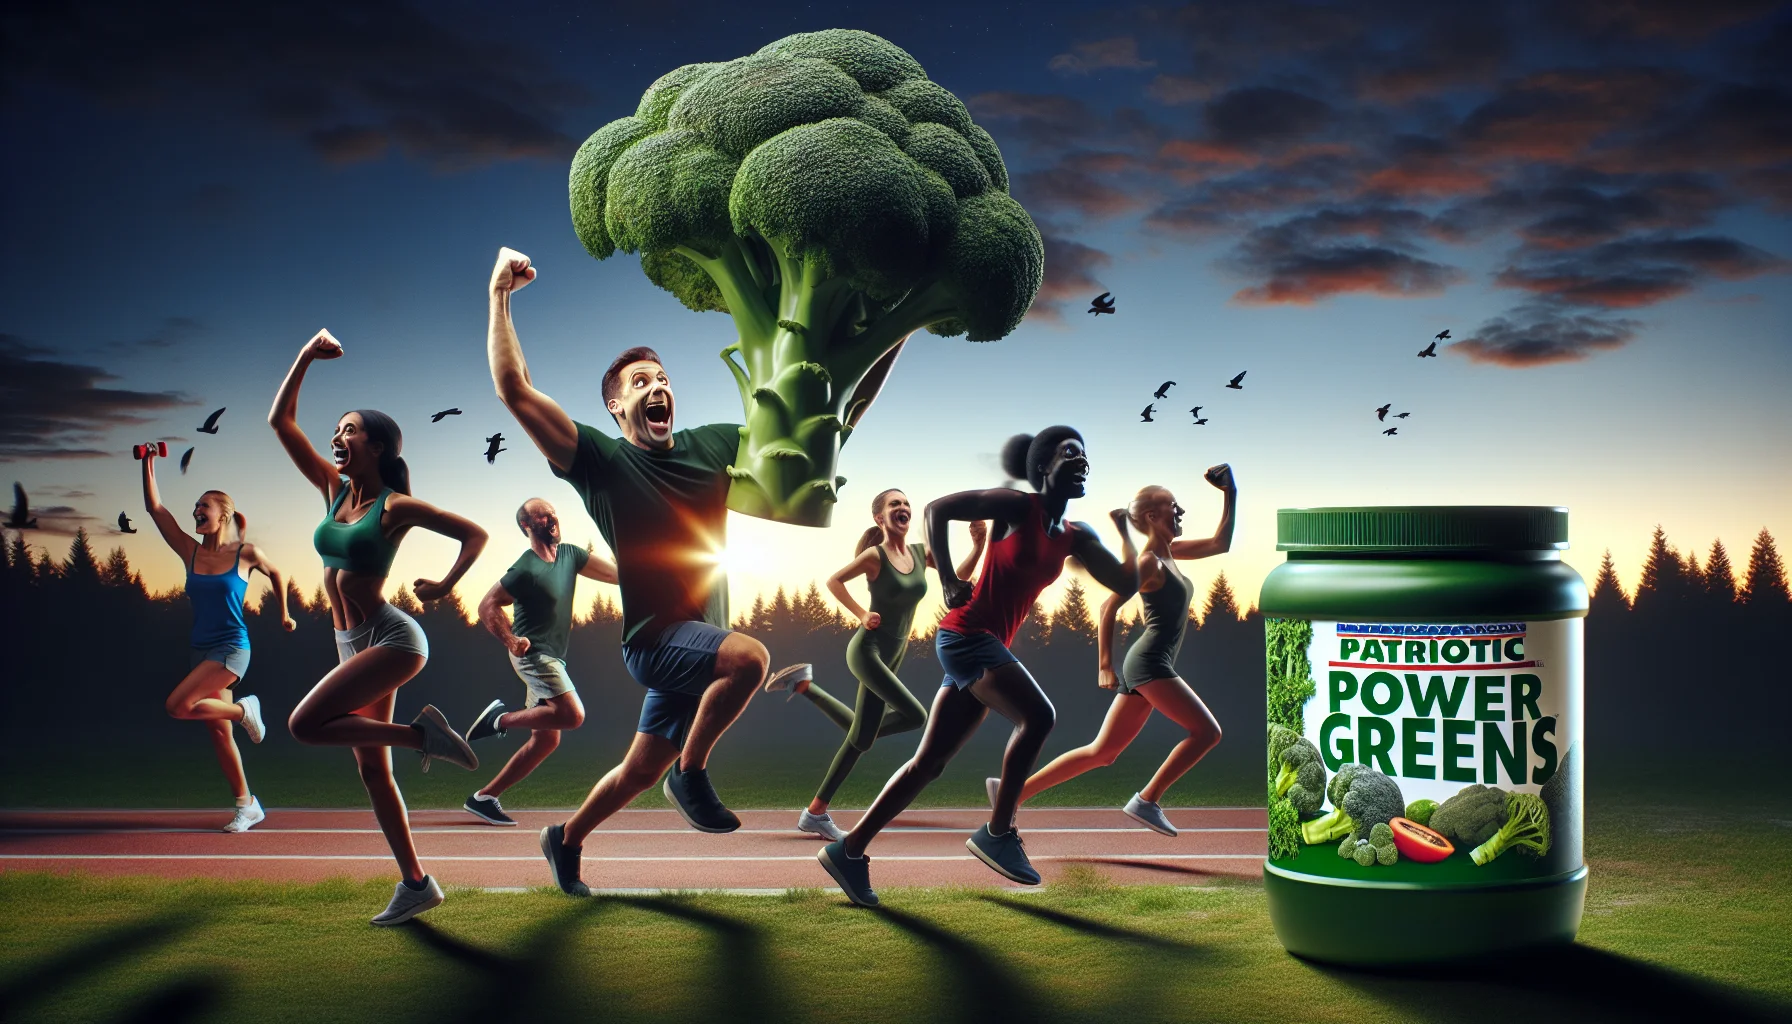 Picture a hilarious scenario to promote 'Patriotic Power Greens: Diet Essentials for Fitness Lovers'. Avert from realistic human individuals jubilantly exercising outdoors. One individual, a Caucasian male, might be attempting an amusingly exaggerated yoga pose, while another, a Black female, might be using a giant broccoli as a dumbbell. Their expressions are joyful and encouraging. The product, a green-colored container labeled 'Patriotic Power Greens', is visibly prominent. Silhouetted against a twilight sky, a group of diverse people in the distant background could be shown briskly racing with oversized fruits and vegetables. The image scream fun, fitness, and health at the same time.